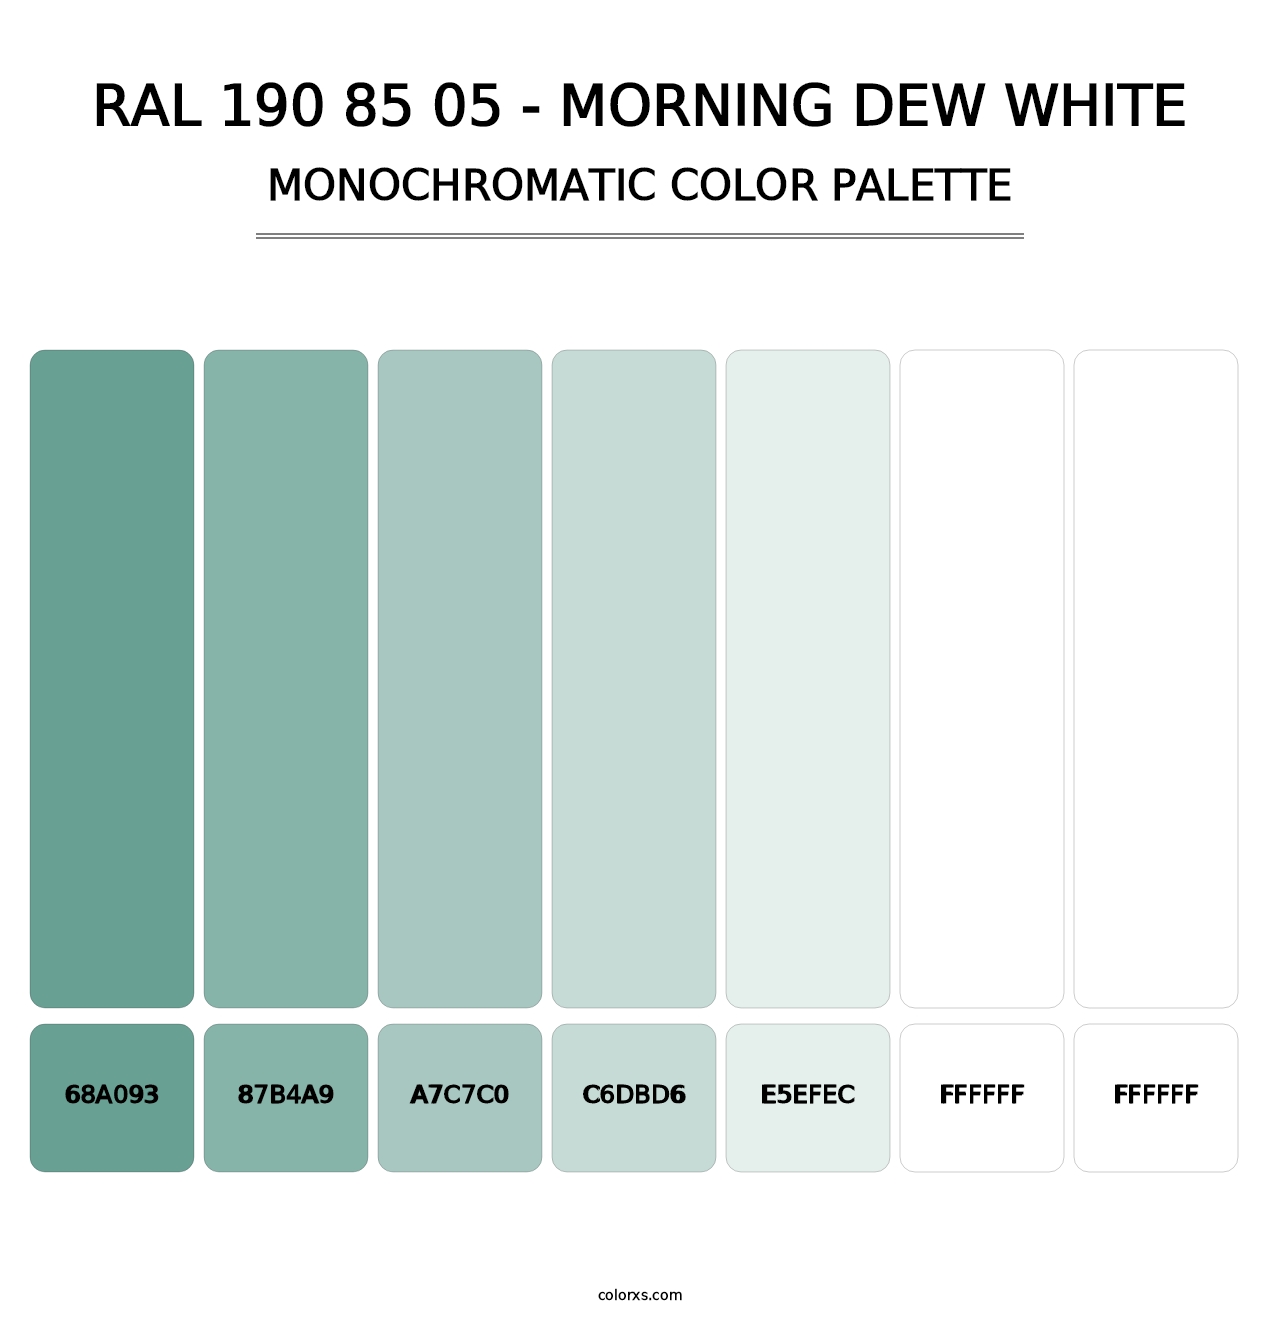 RAL 190 85 05 - Morning Dew White - Monochromatic Color Palette